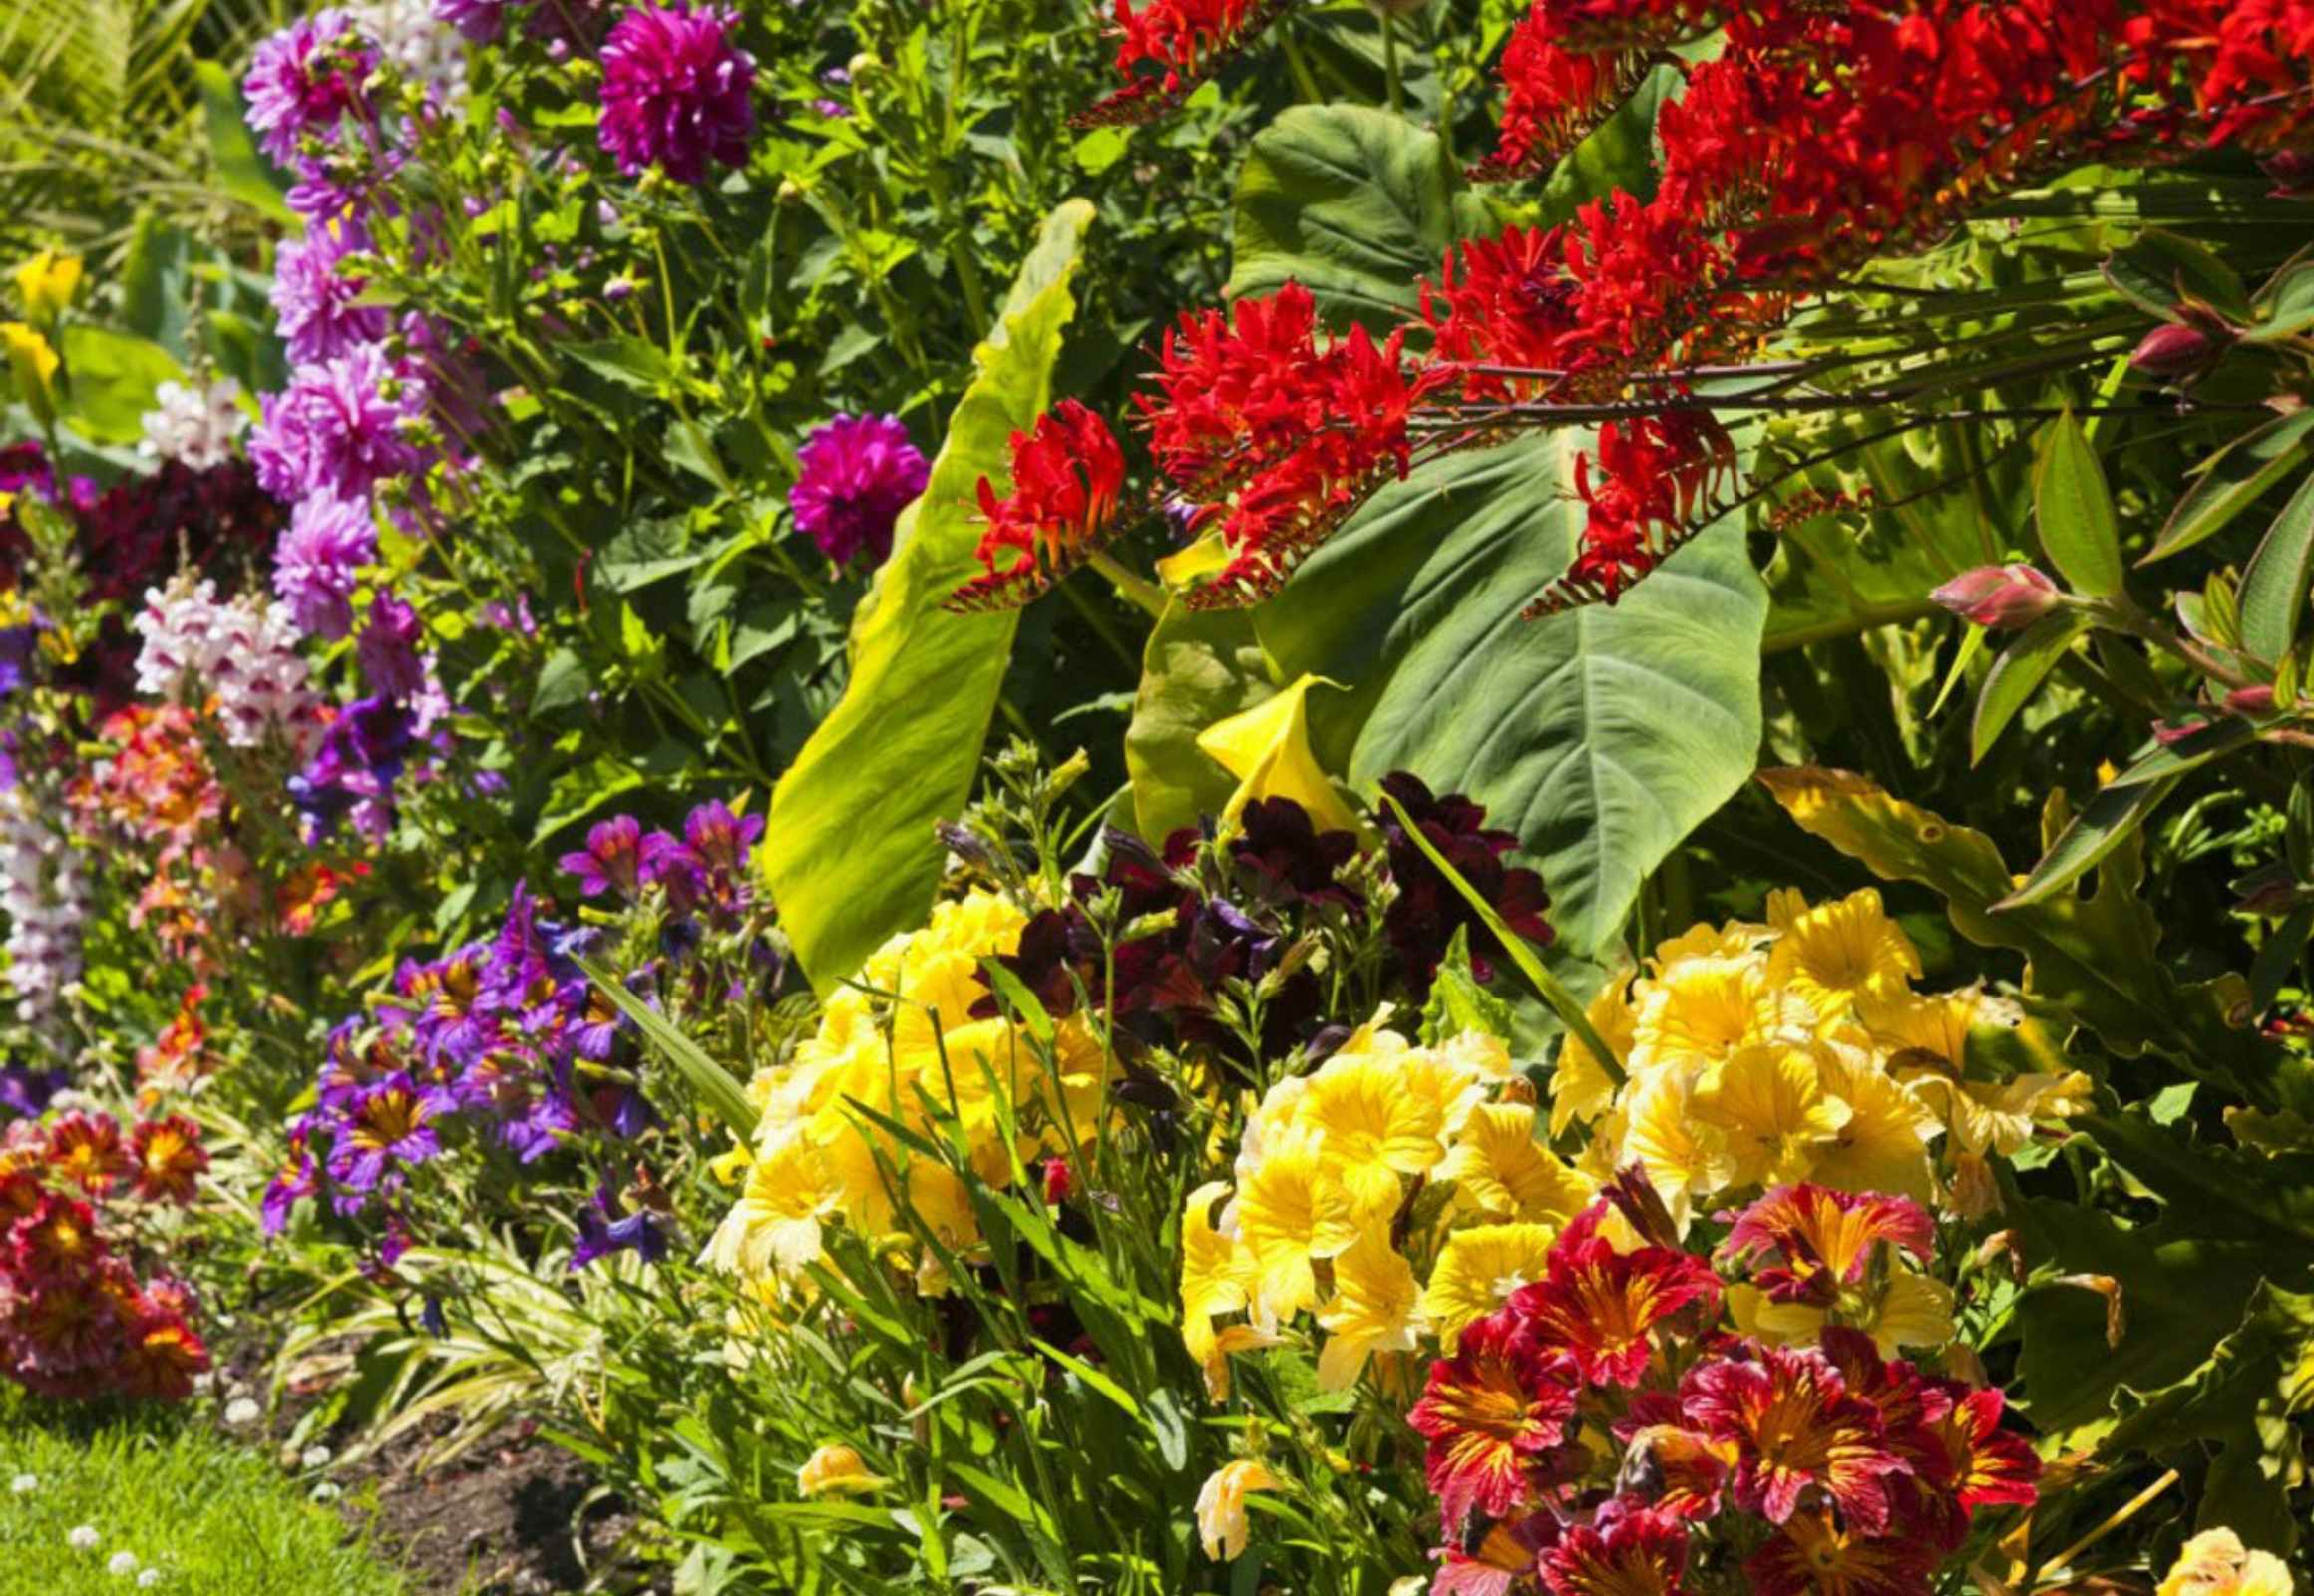 Bees and Butterflies Garden Flowers: Get 100 Bulbs for Only $20 Shipped